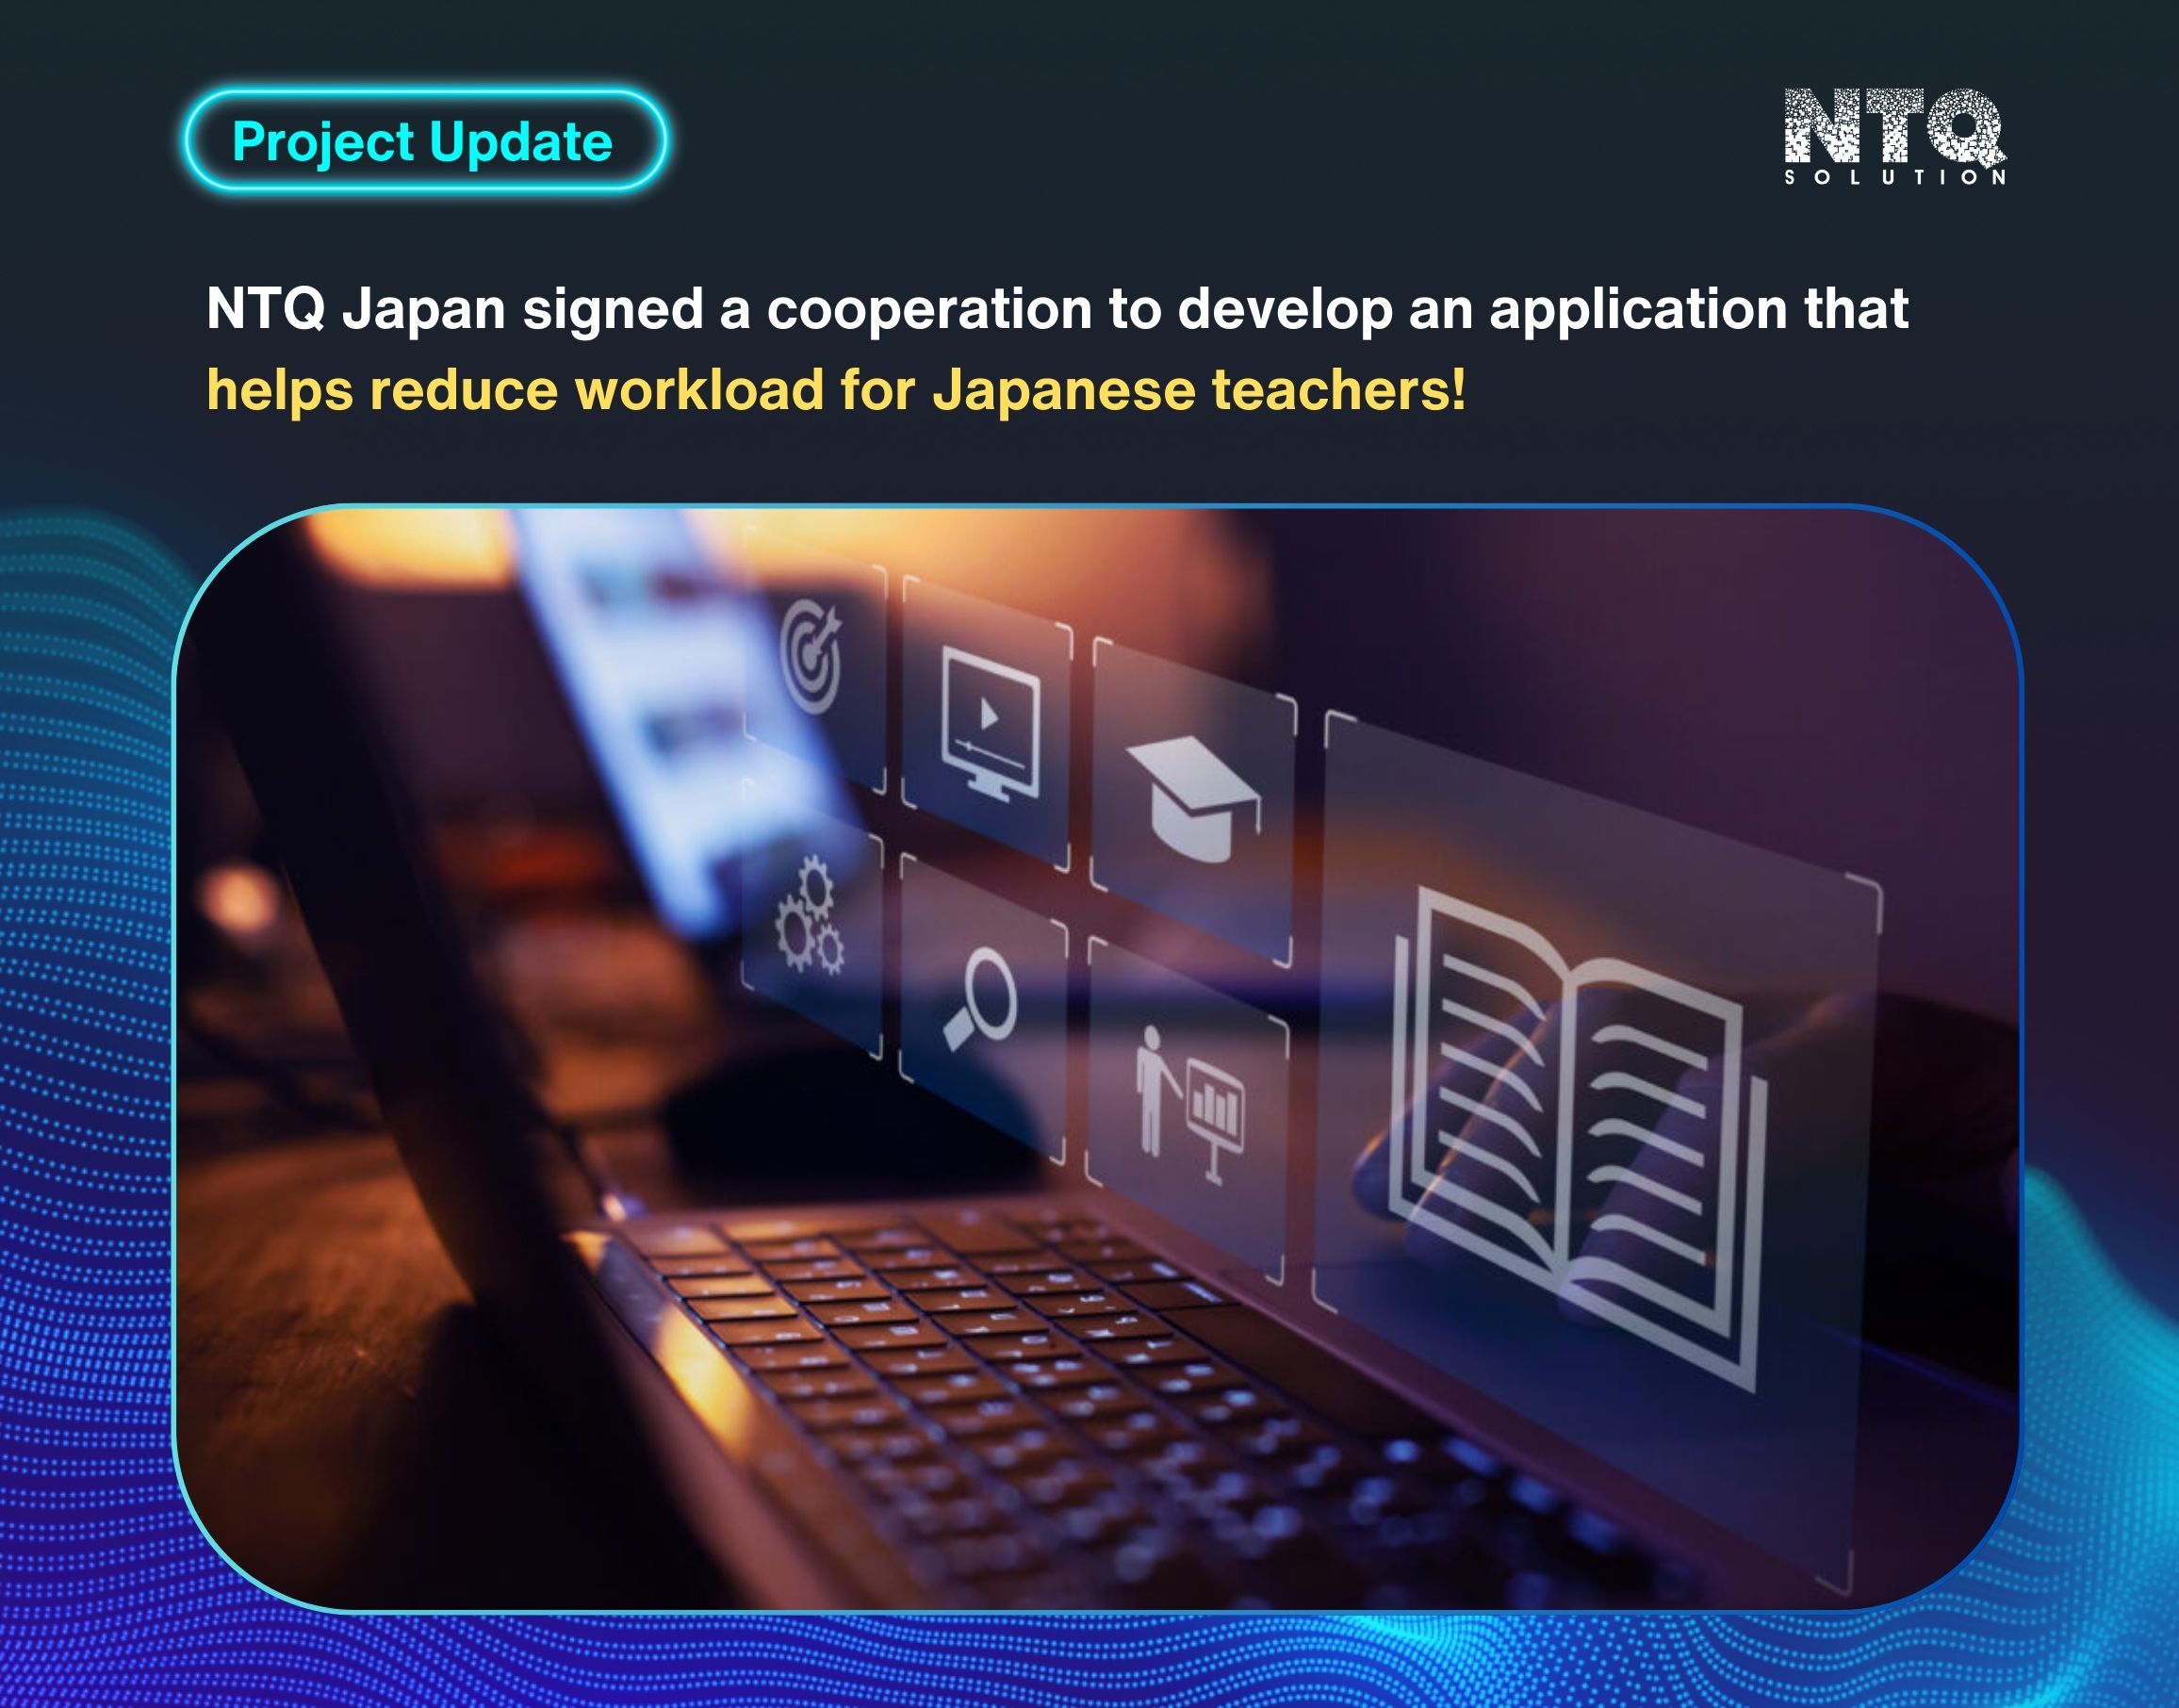 NTQ Japan To Develop An Application That Helps Reduce Workload for Japanese Teachers!